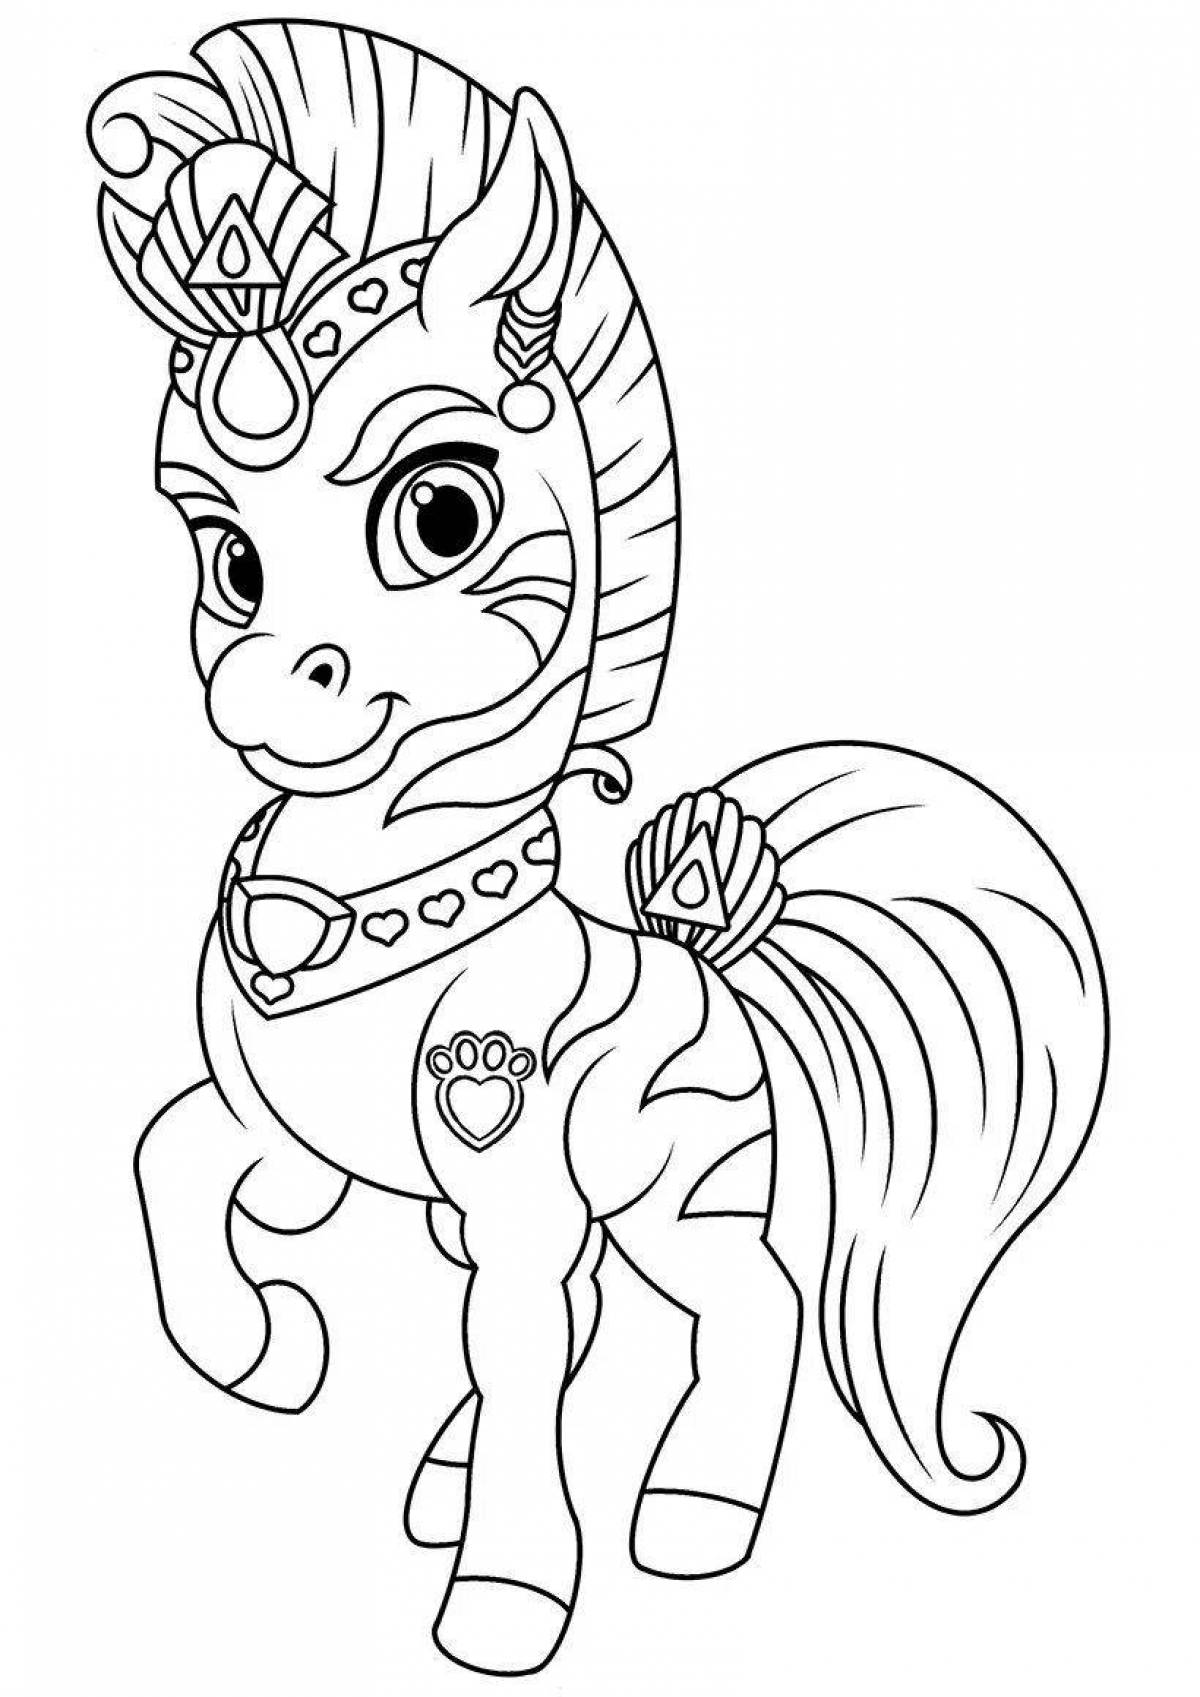 Amazing animal princess coloring book for girls